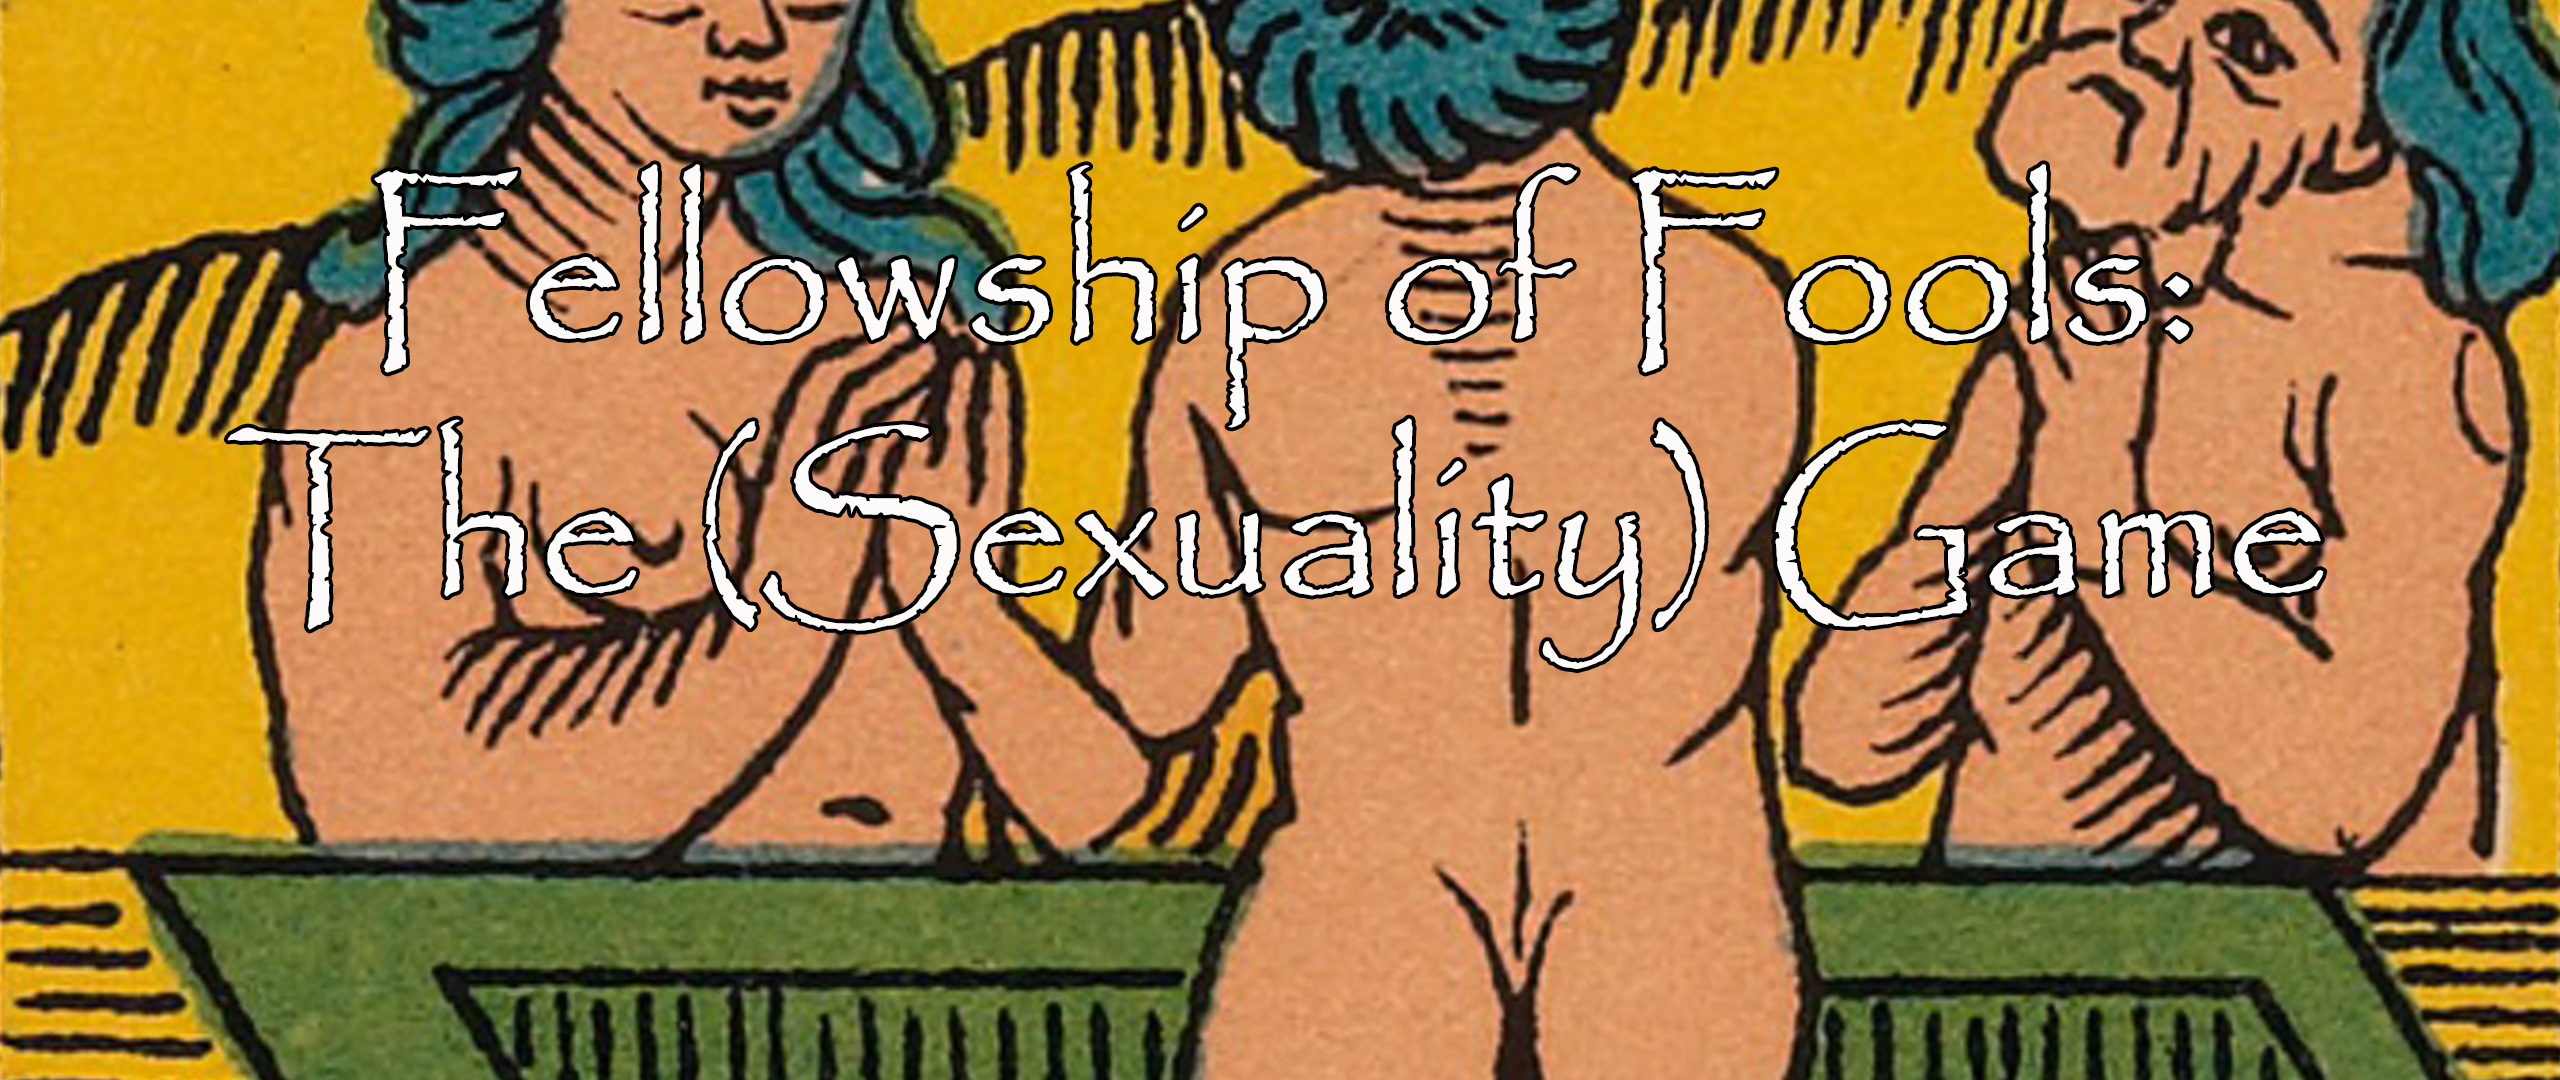 Fellowship of Fools: The (Sexuality) Game